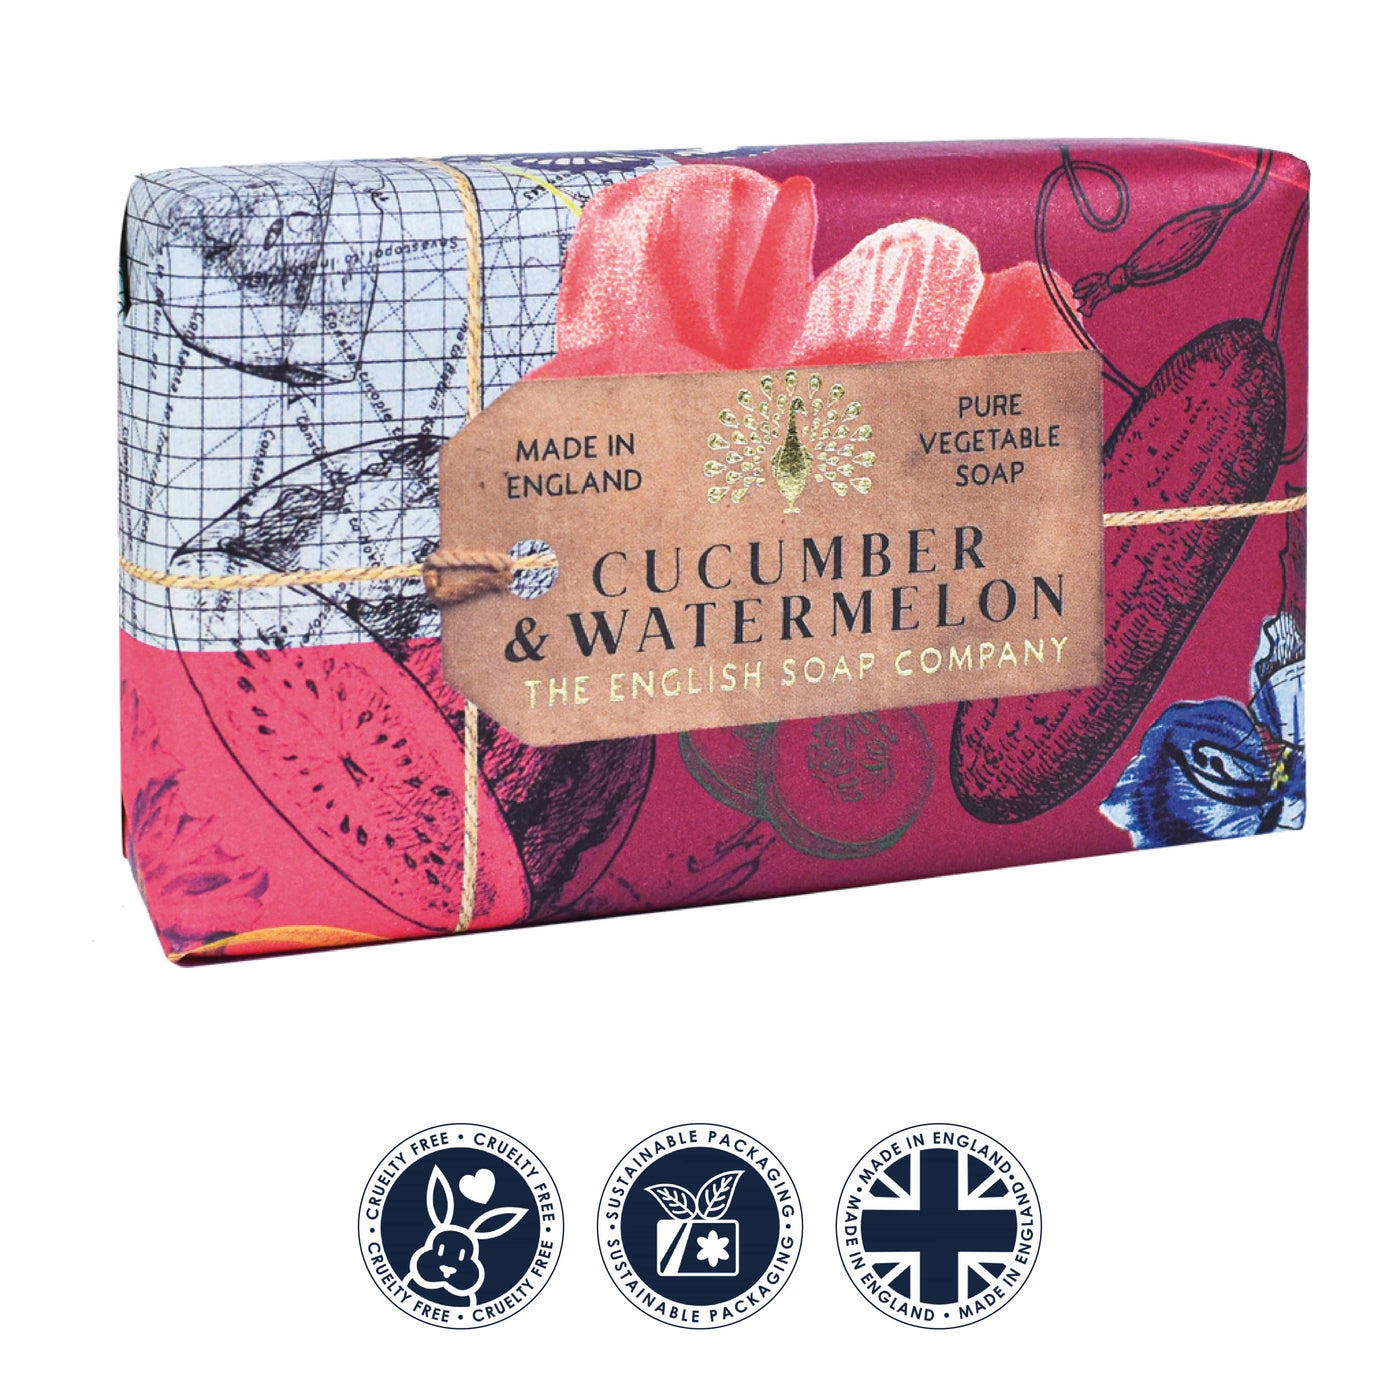 Anniversary Cucumber & Watermelon Soap Bar from our Luxury Bar Soap collection by The English Soap Company